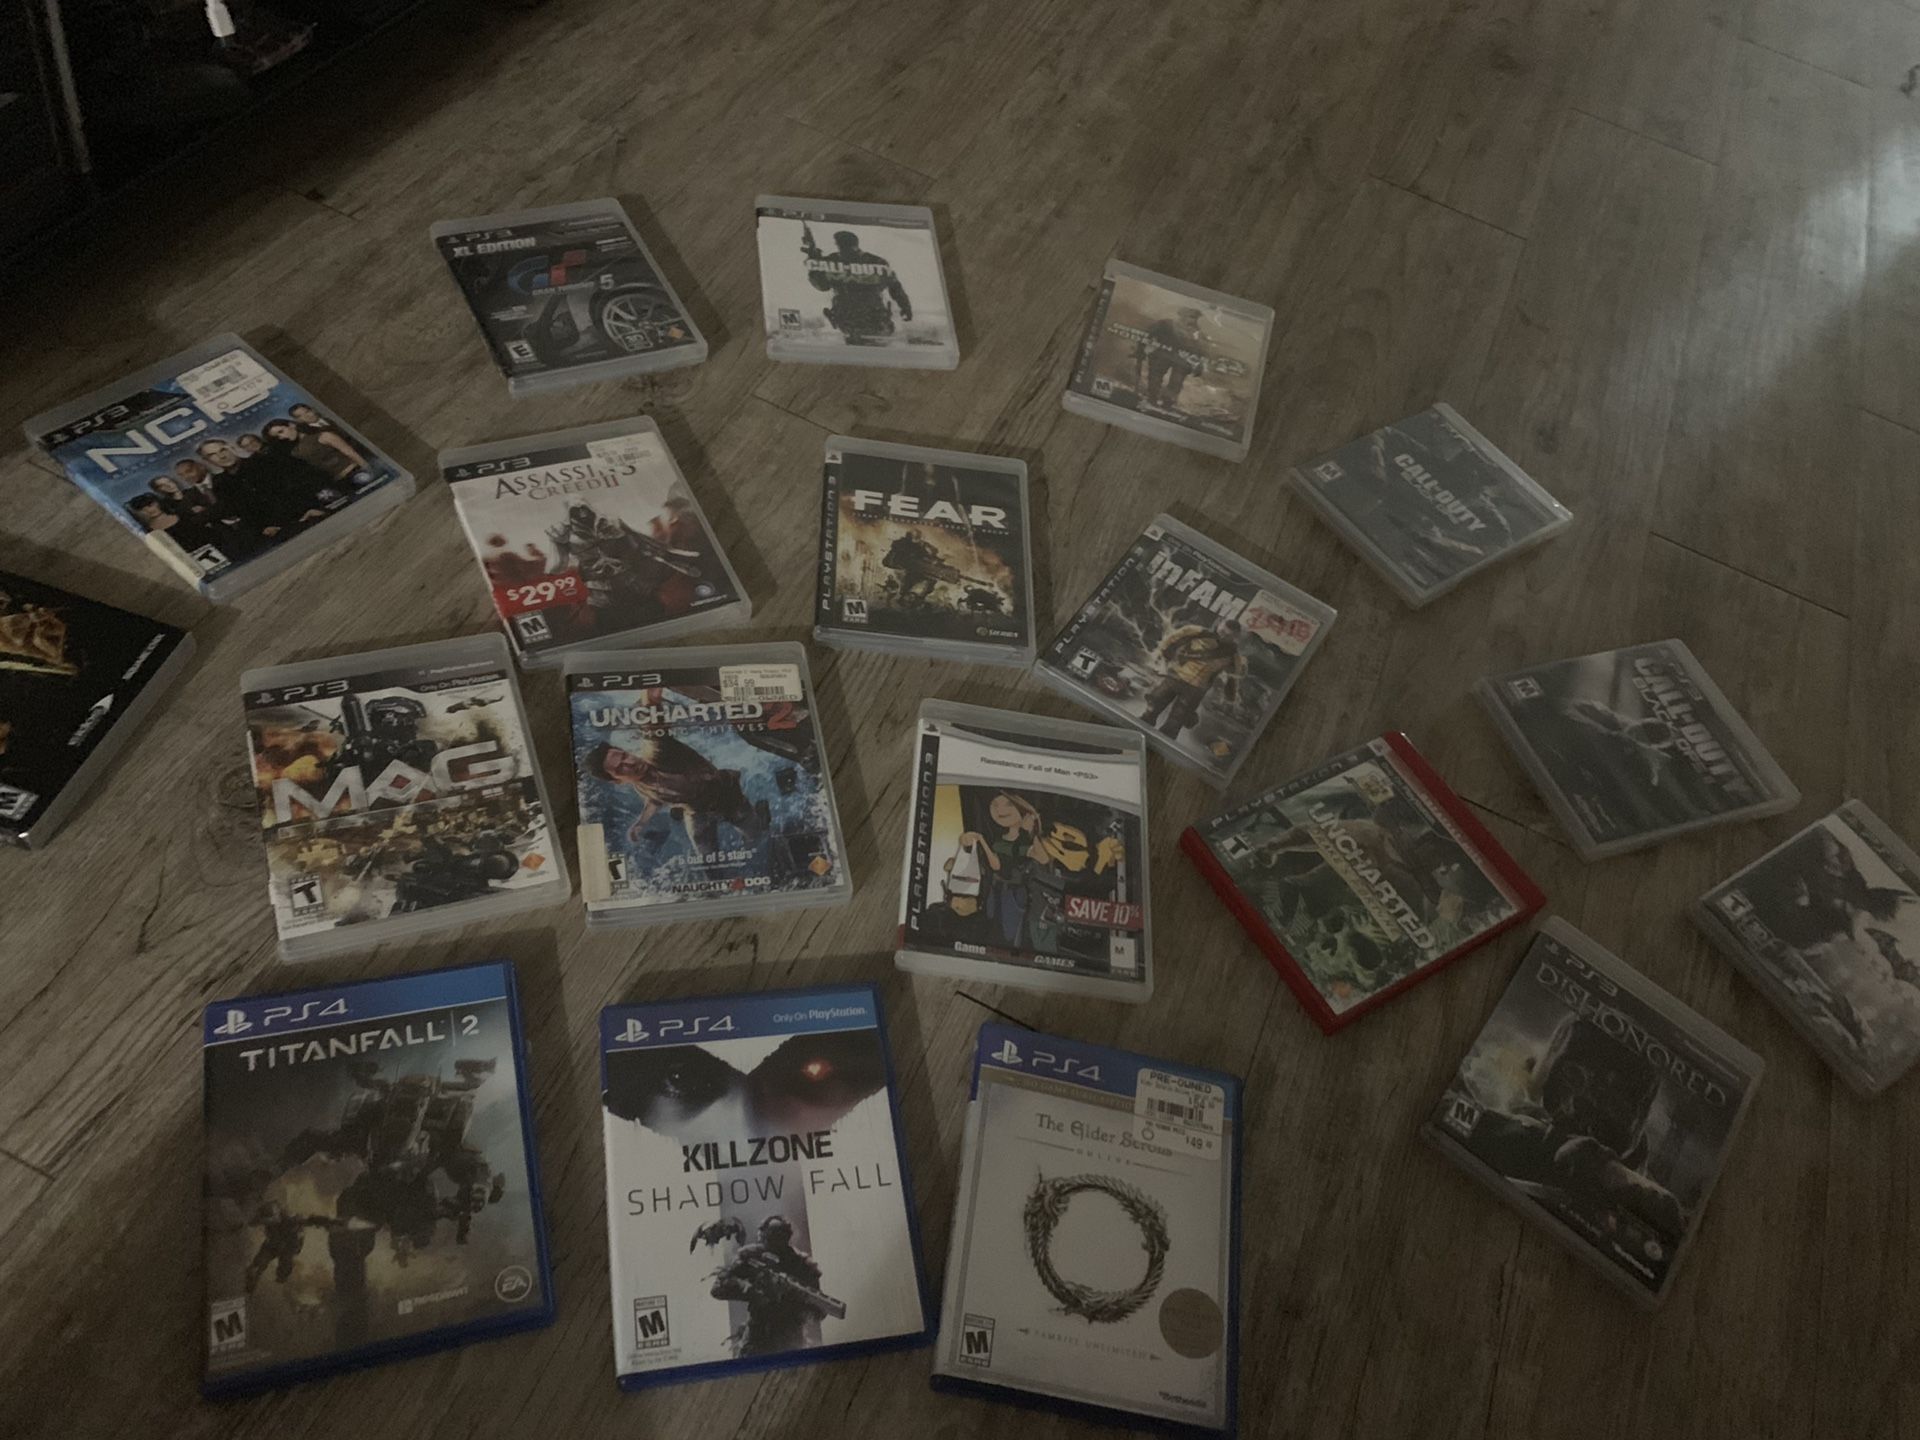 PS3 and PS4 games